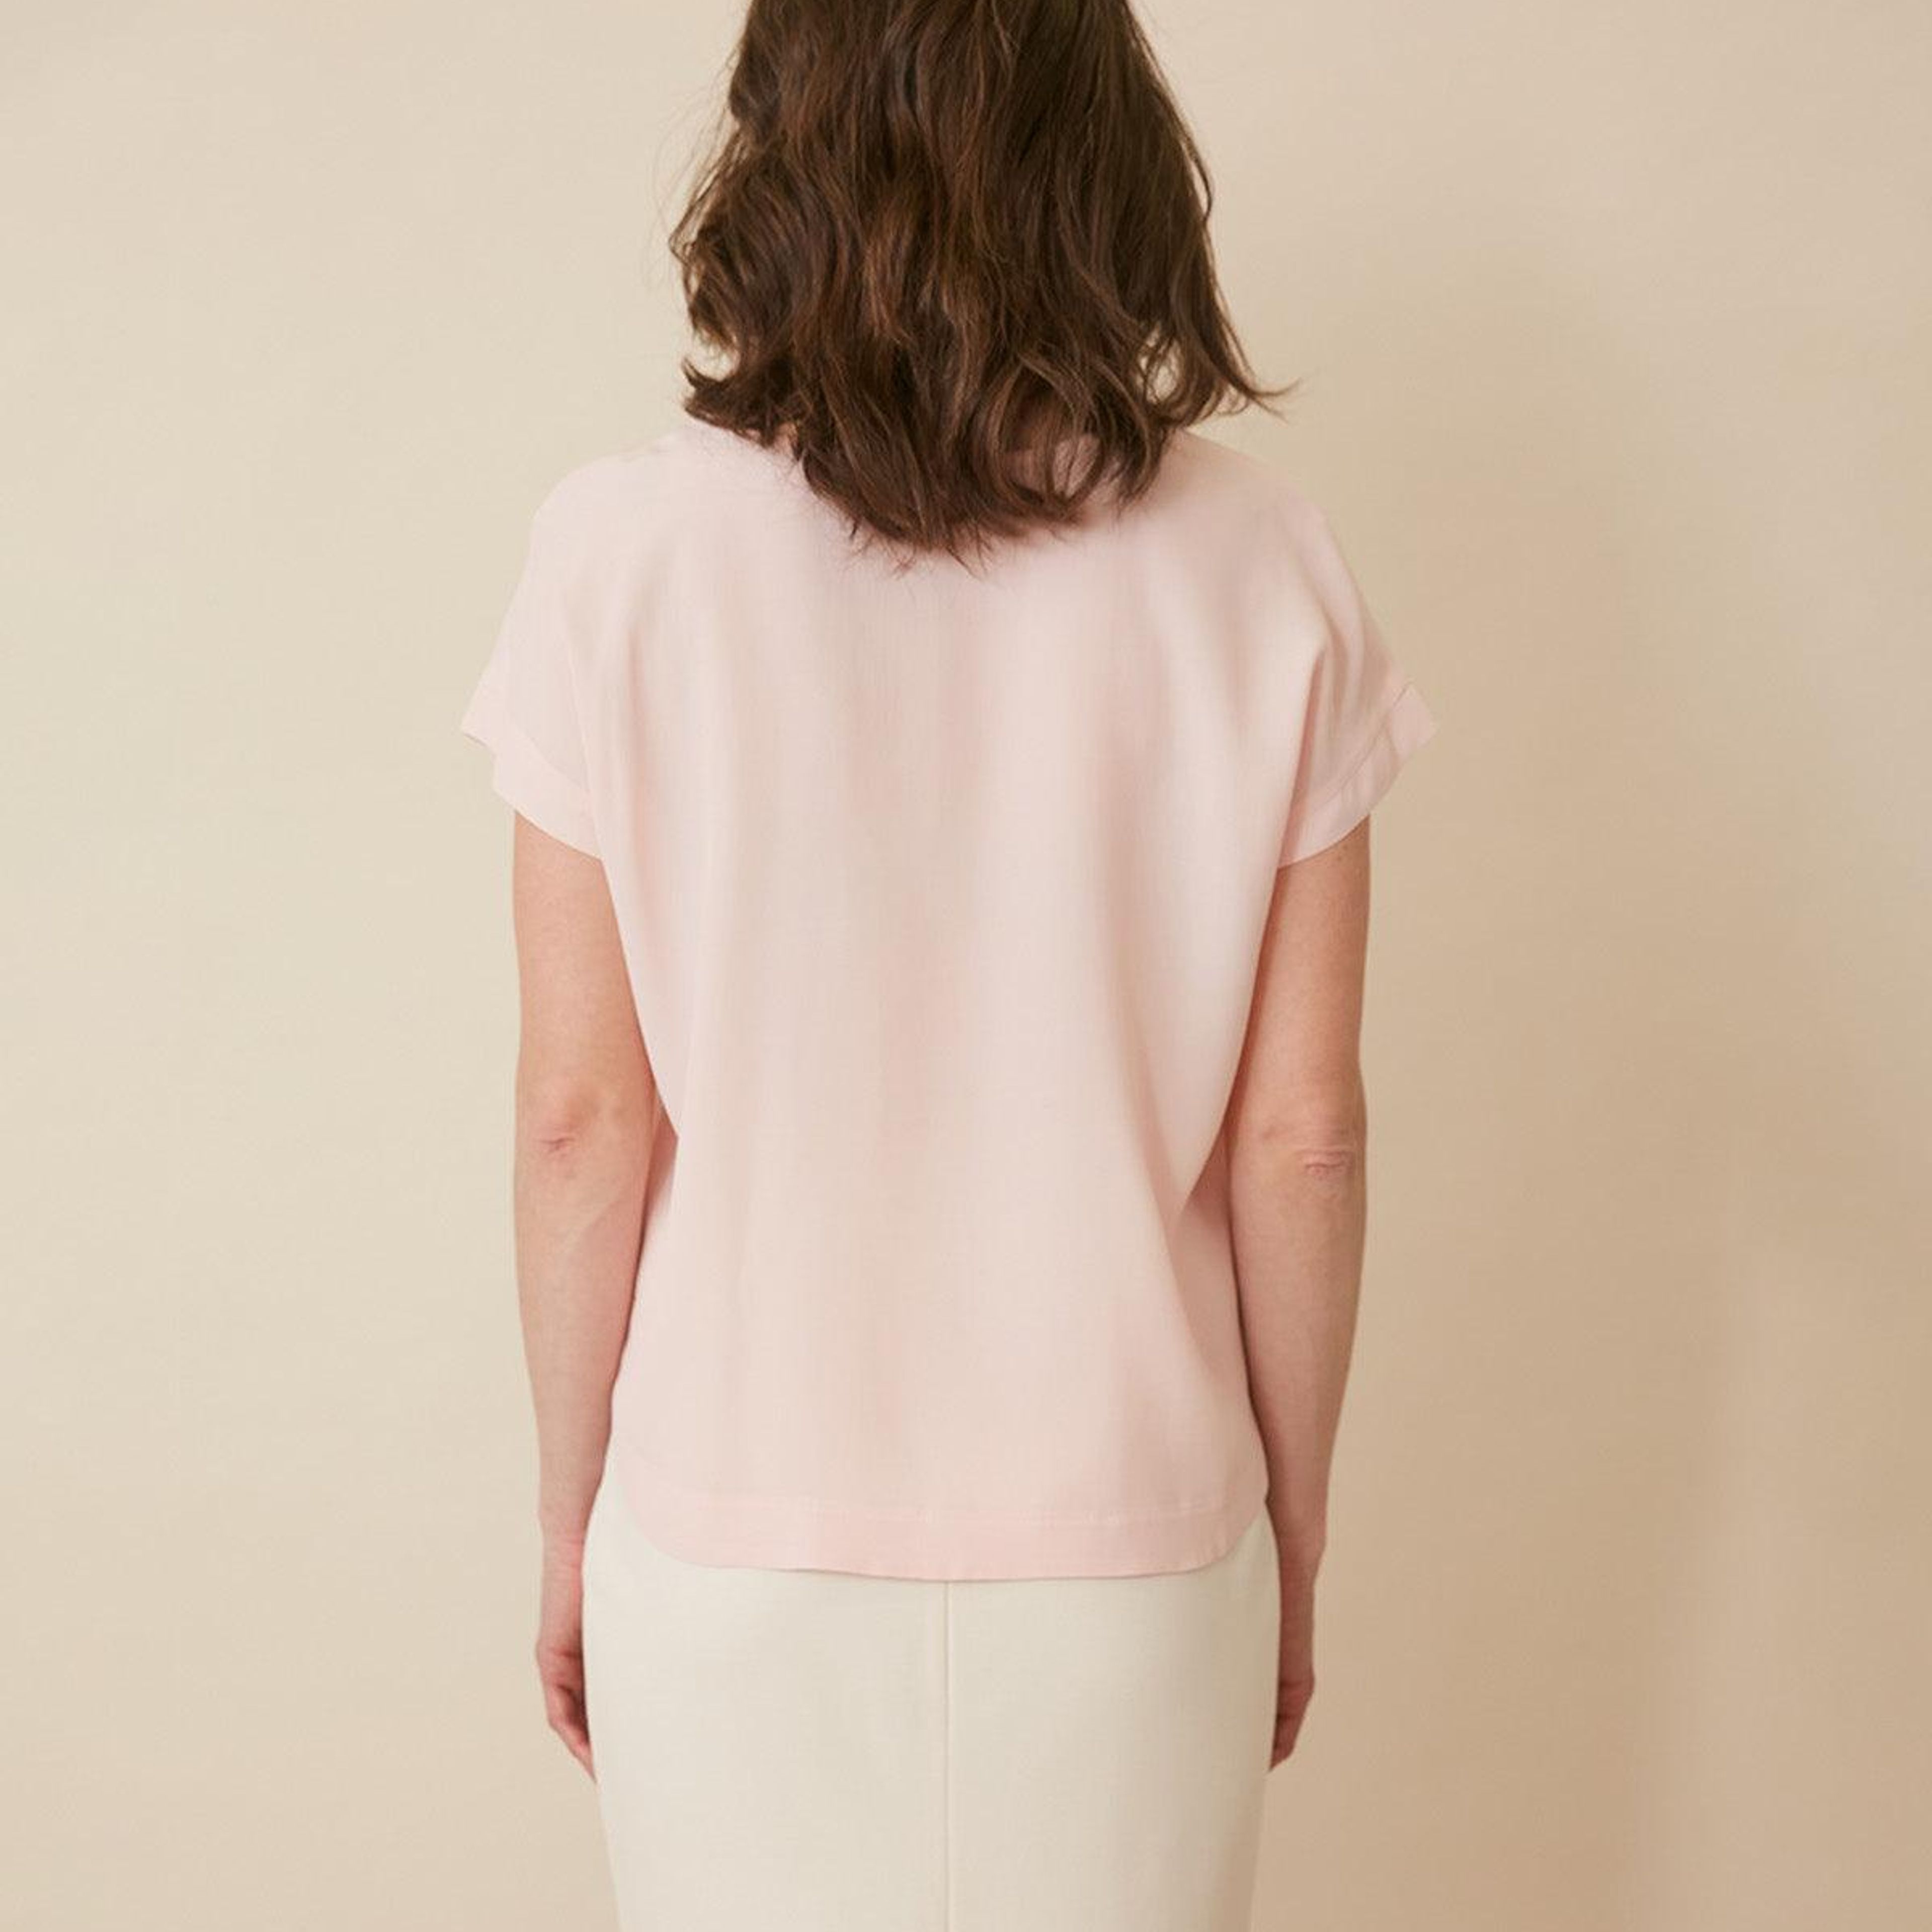 The Florence T-Shirt Blouse